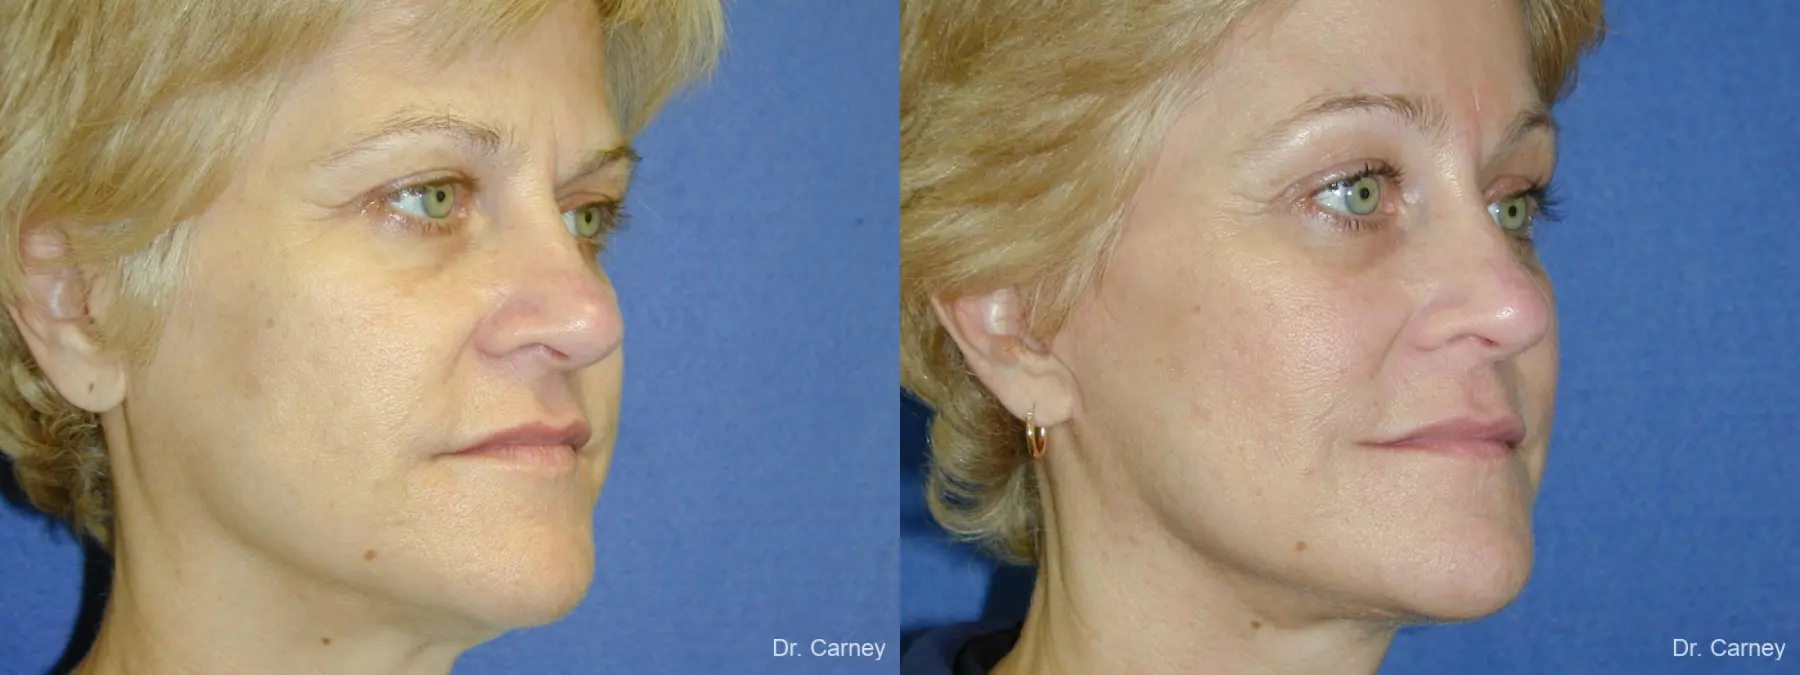 Virginia Beach Brow Lift 1345 - Before and After